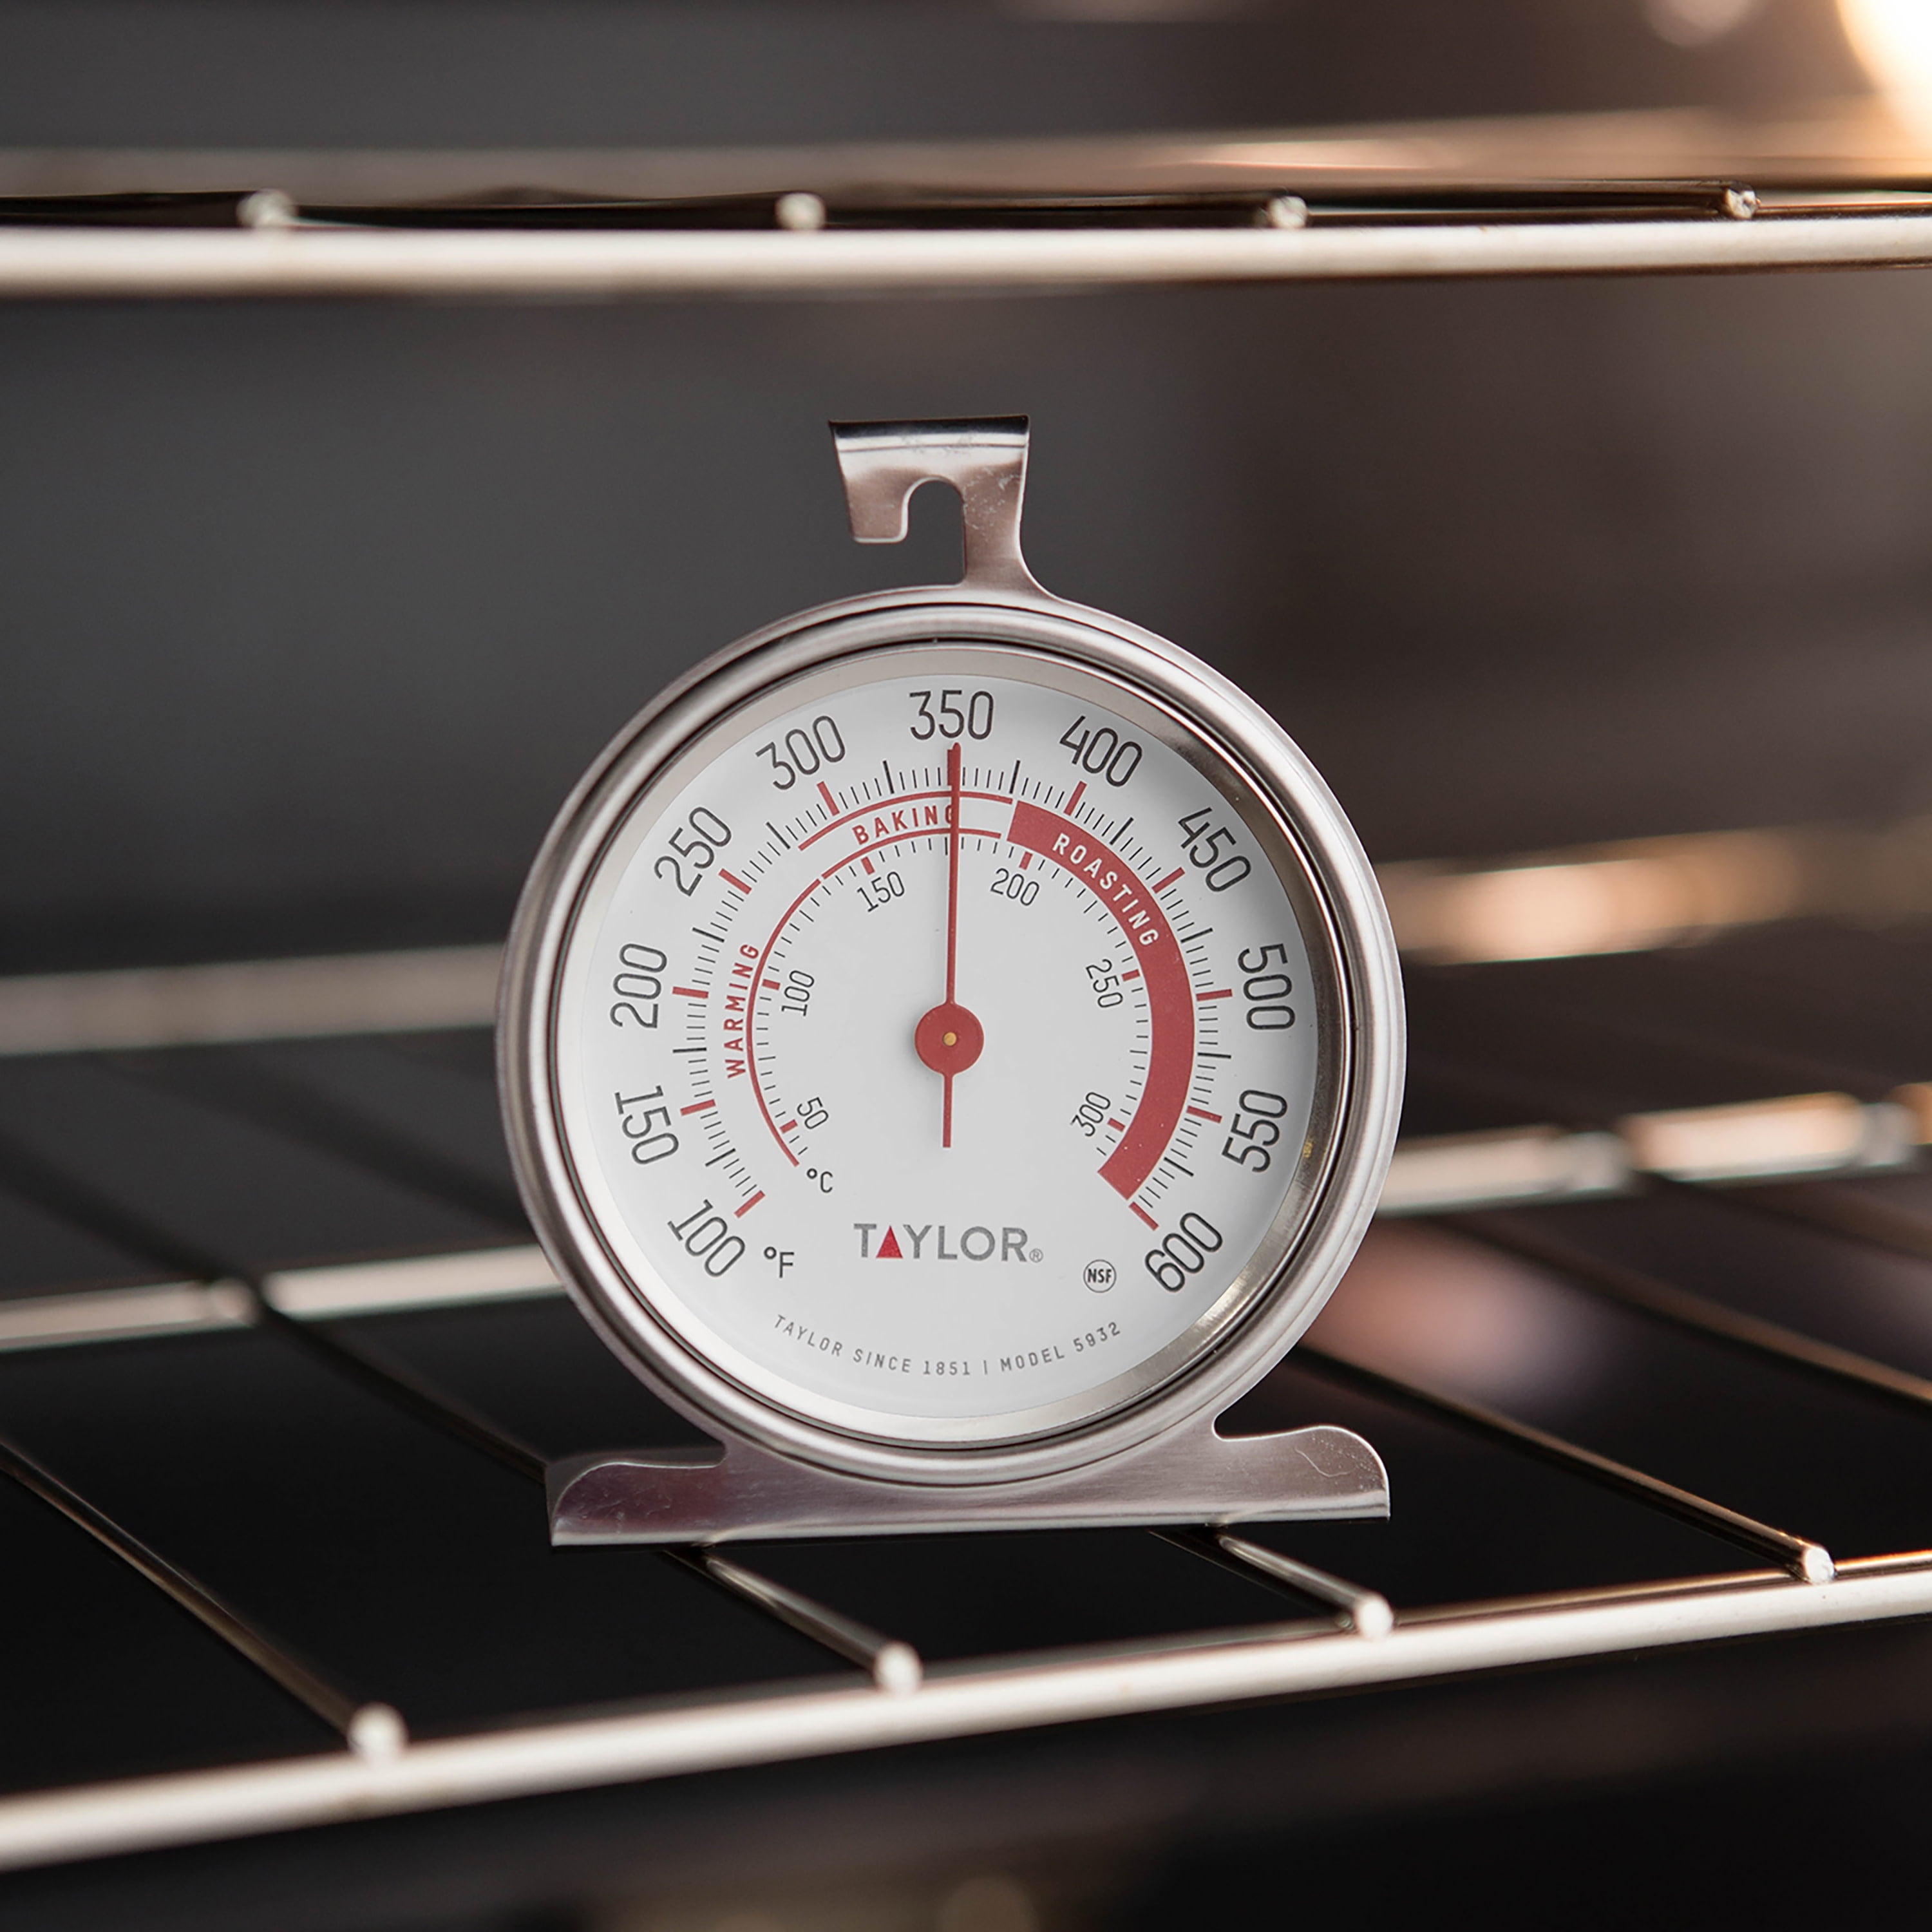 Oven Thermometer, Large Dial Cooking Thermometer, Pointer Type